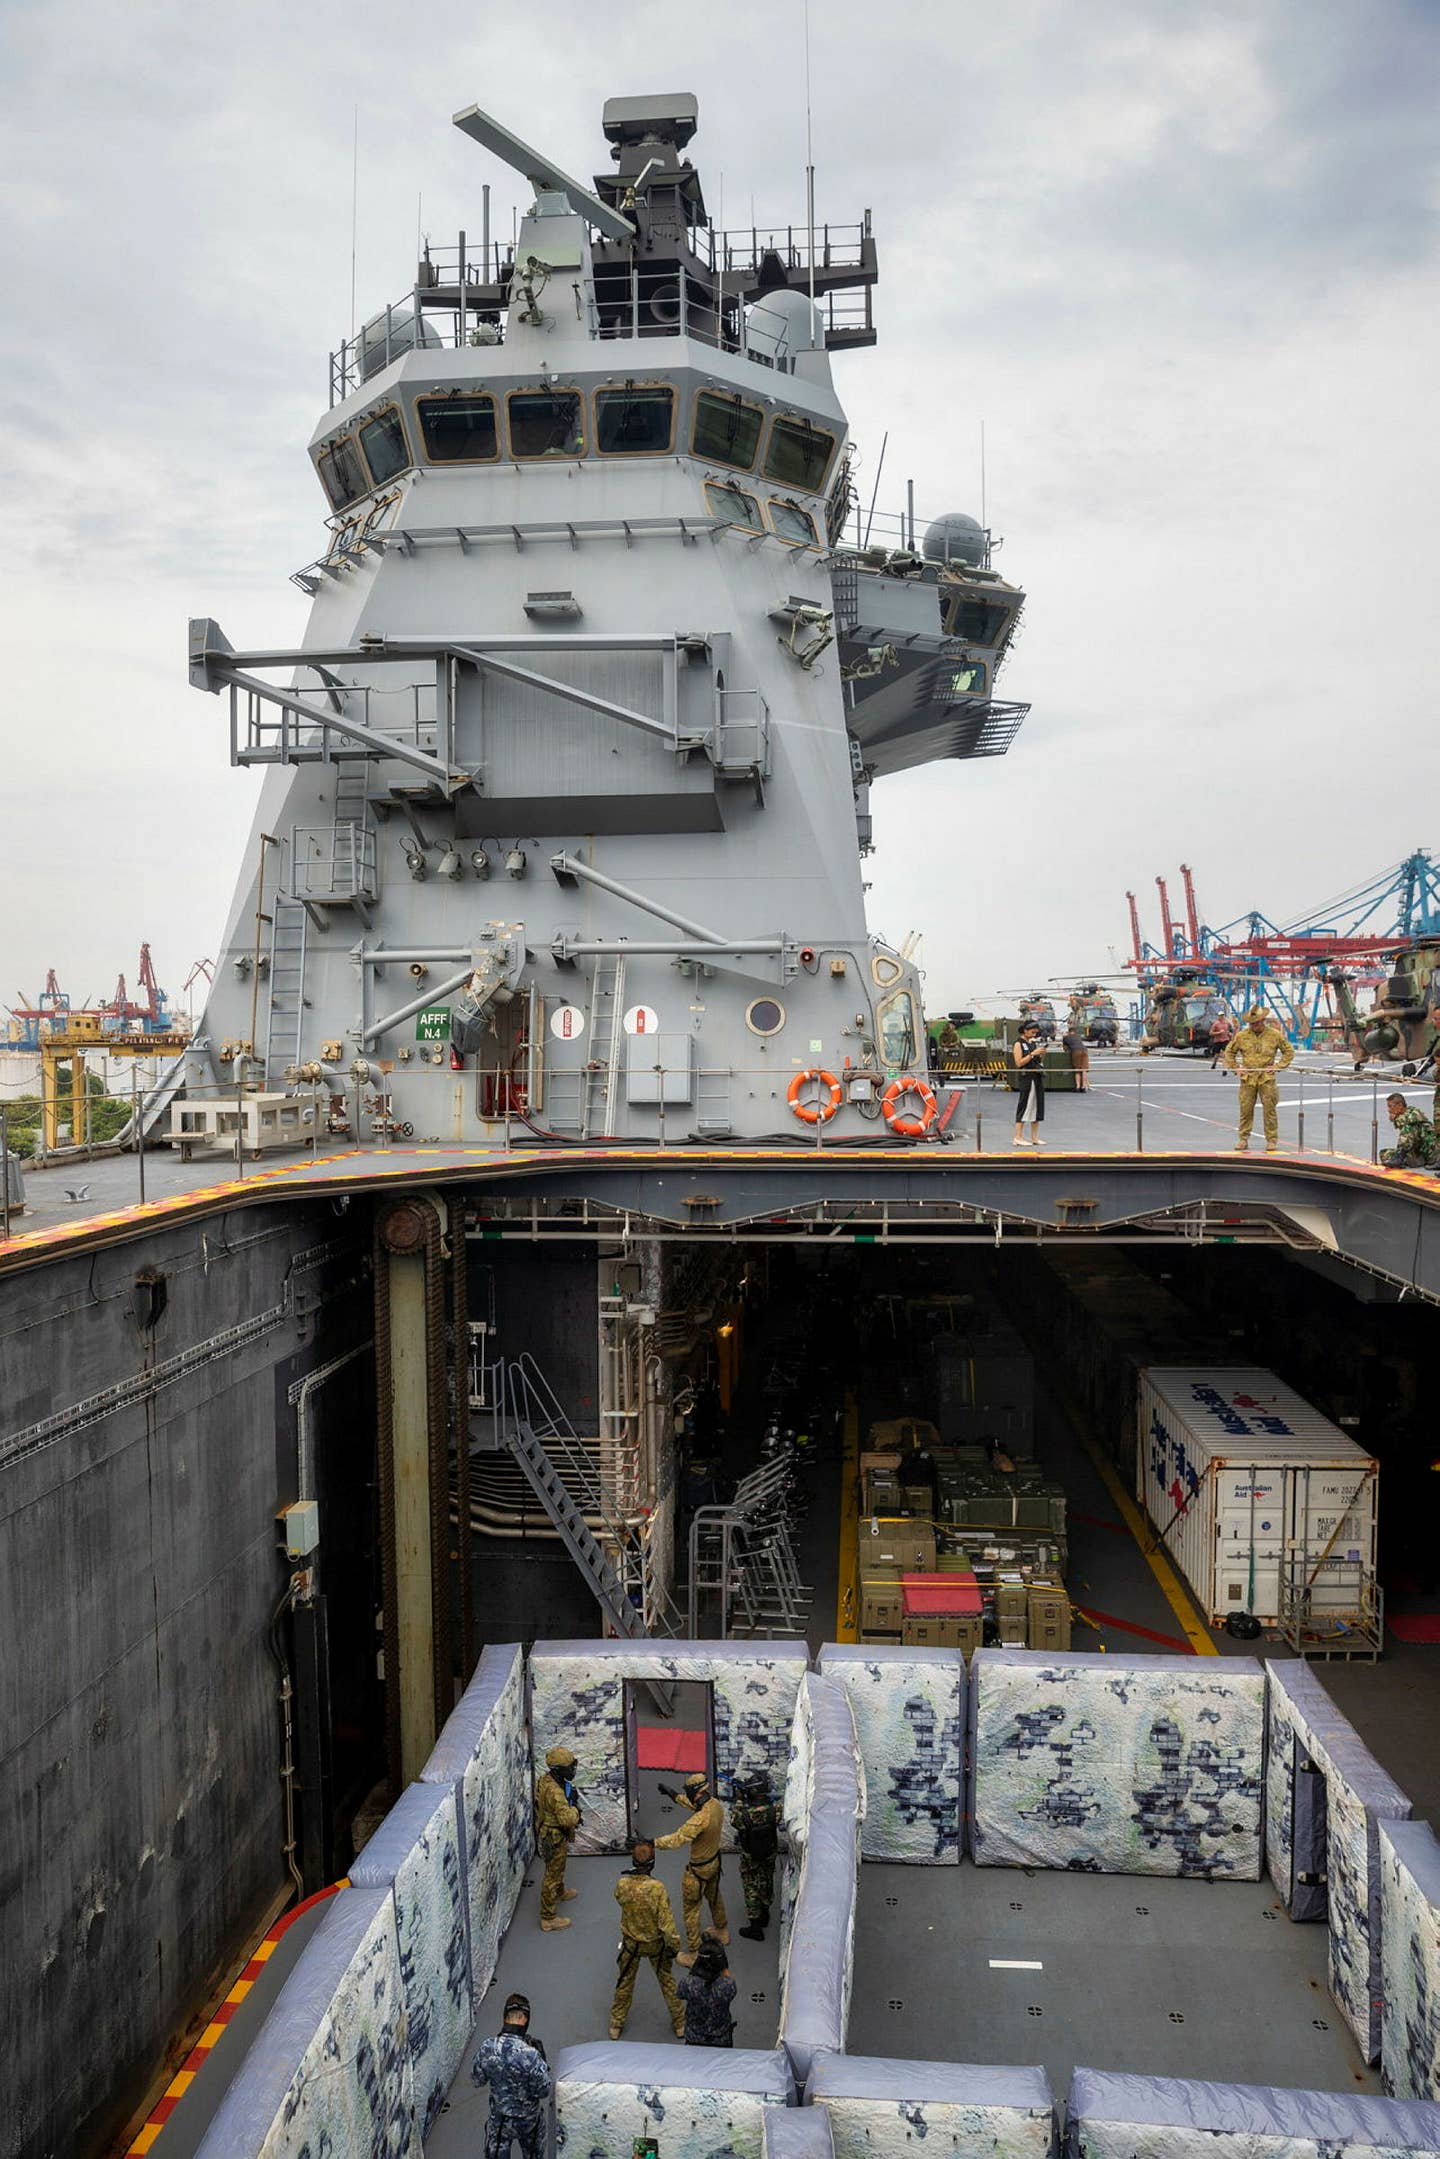 The shoot house setup on the aircraft elevator ahead of the vessel's island. The elevator is seen in its lowered position. <em>Australian Department of Defense.</em>